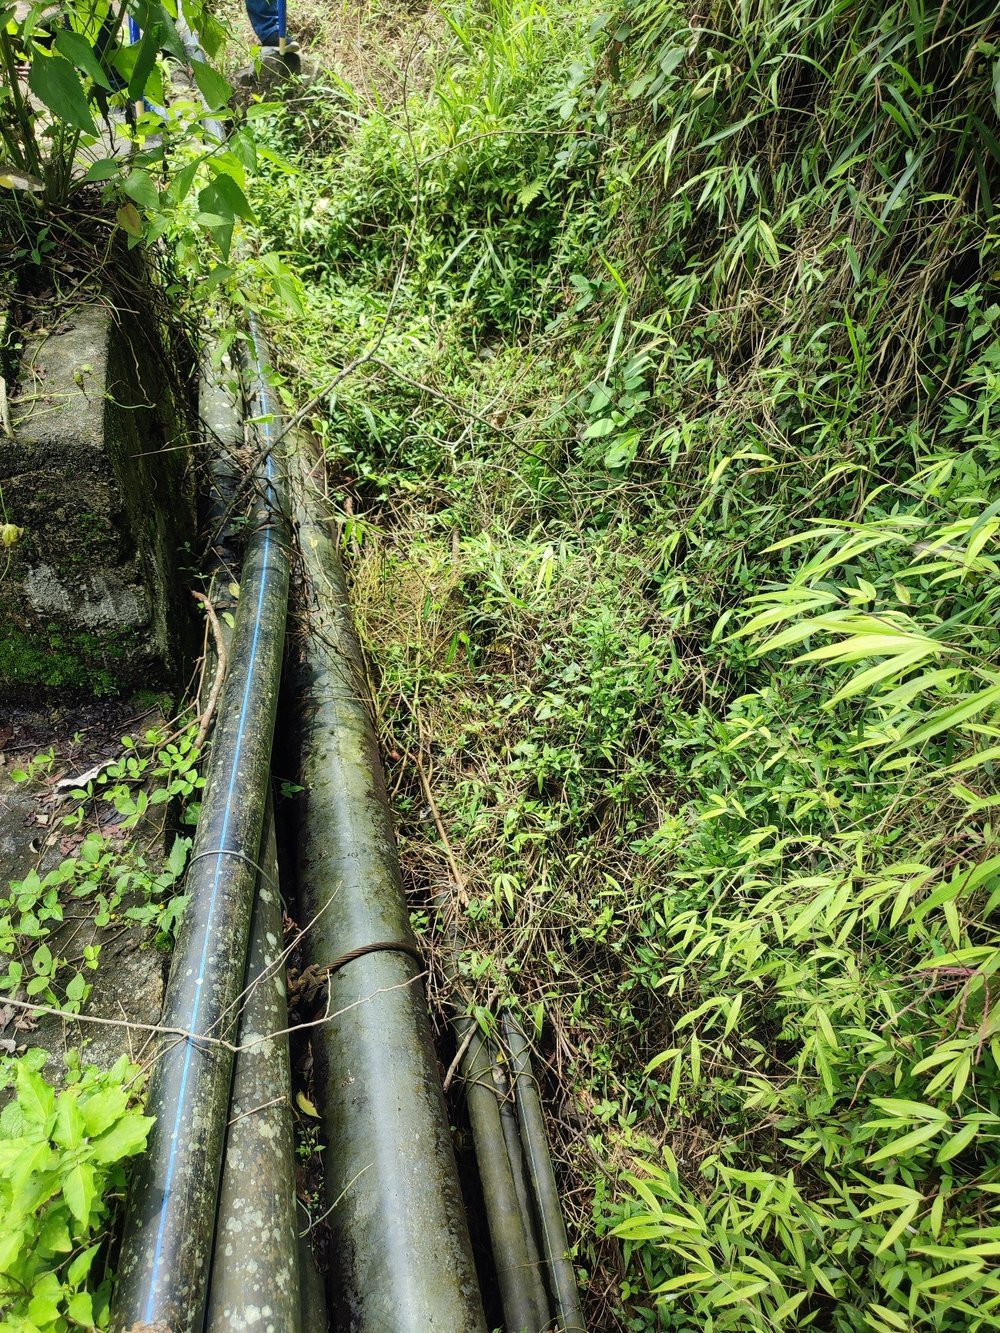 Pipeline packages in Spring Umbul Wadon, that get constantly affect by lava steam when the Merapi volcano erupts